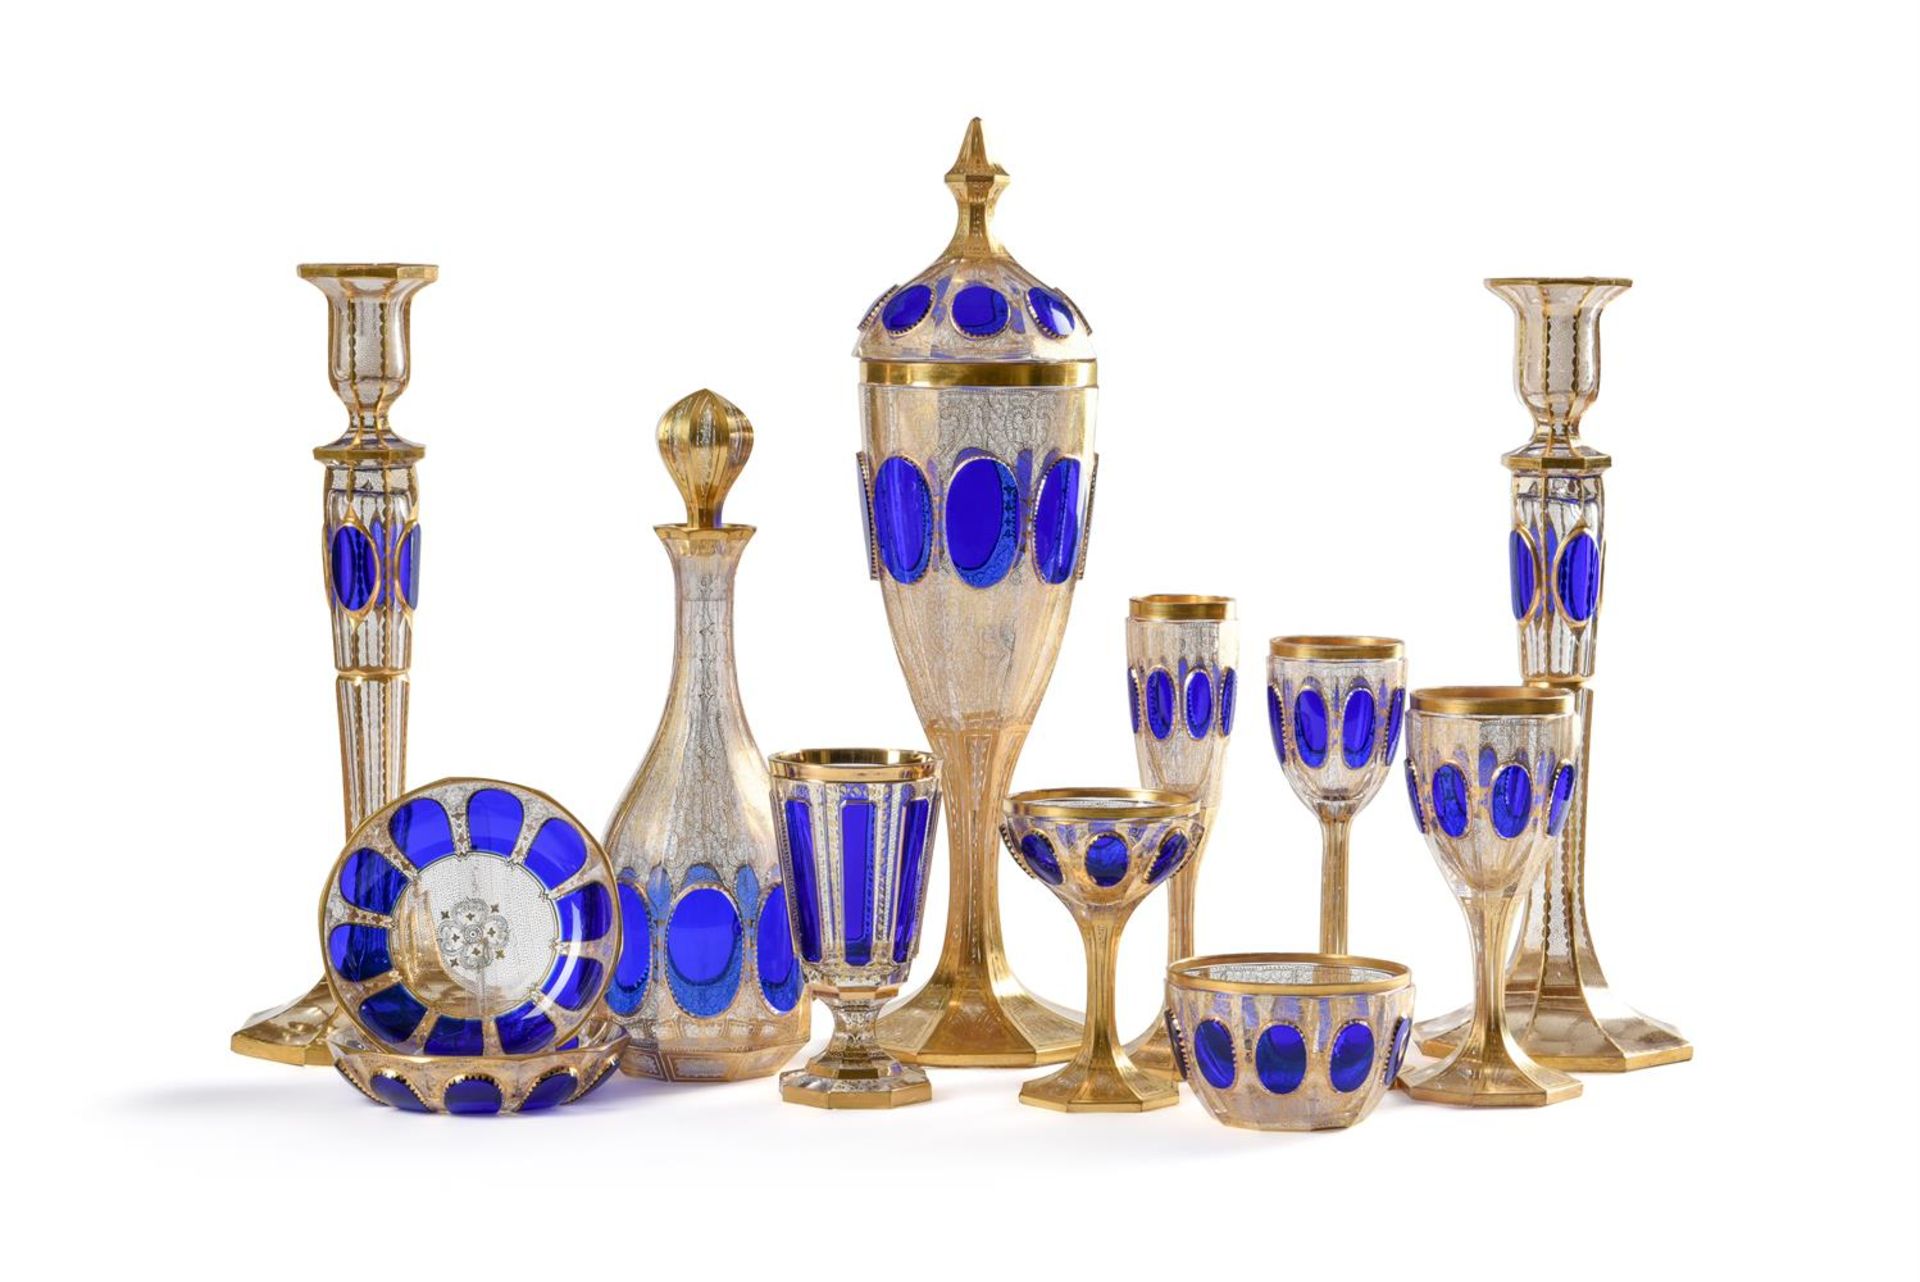 A VENETIAN CLEAR GLASS WITH BLUE FLASHED CABOUCHONS, MID 20TH CENTURY - Image 2 of 2